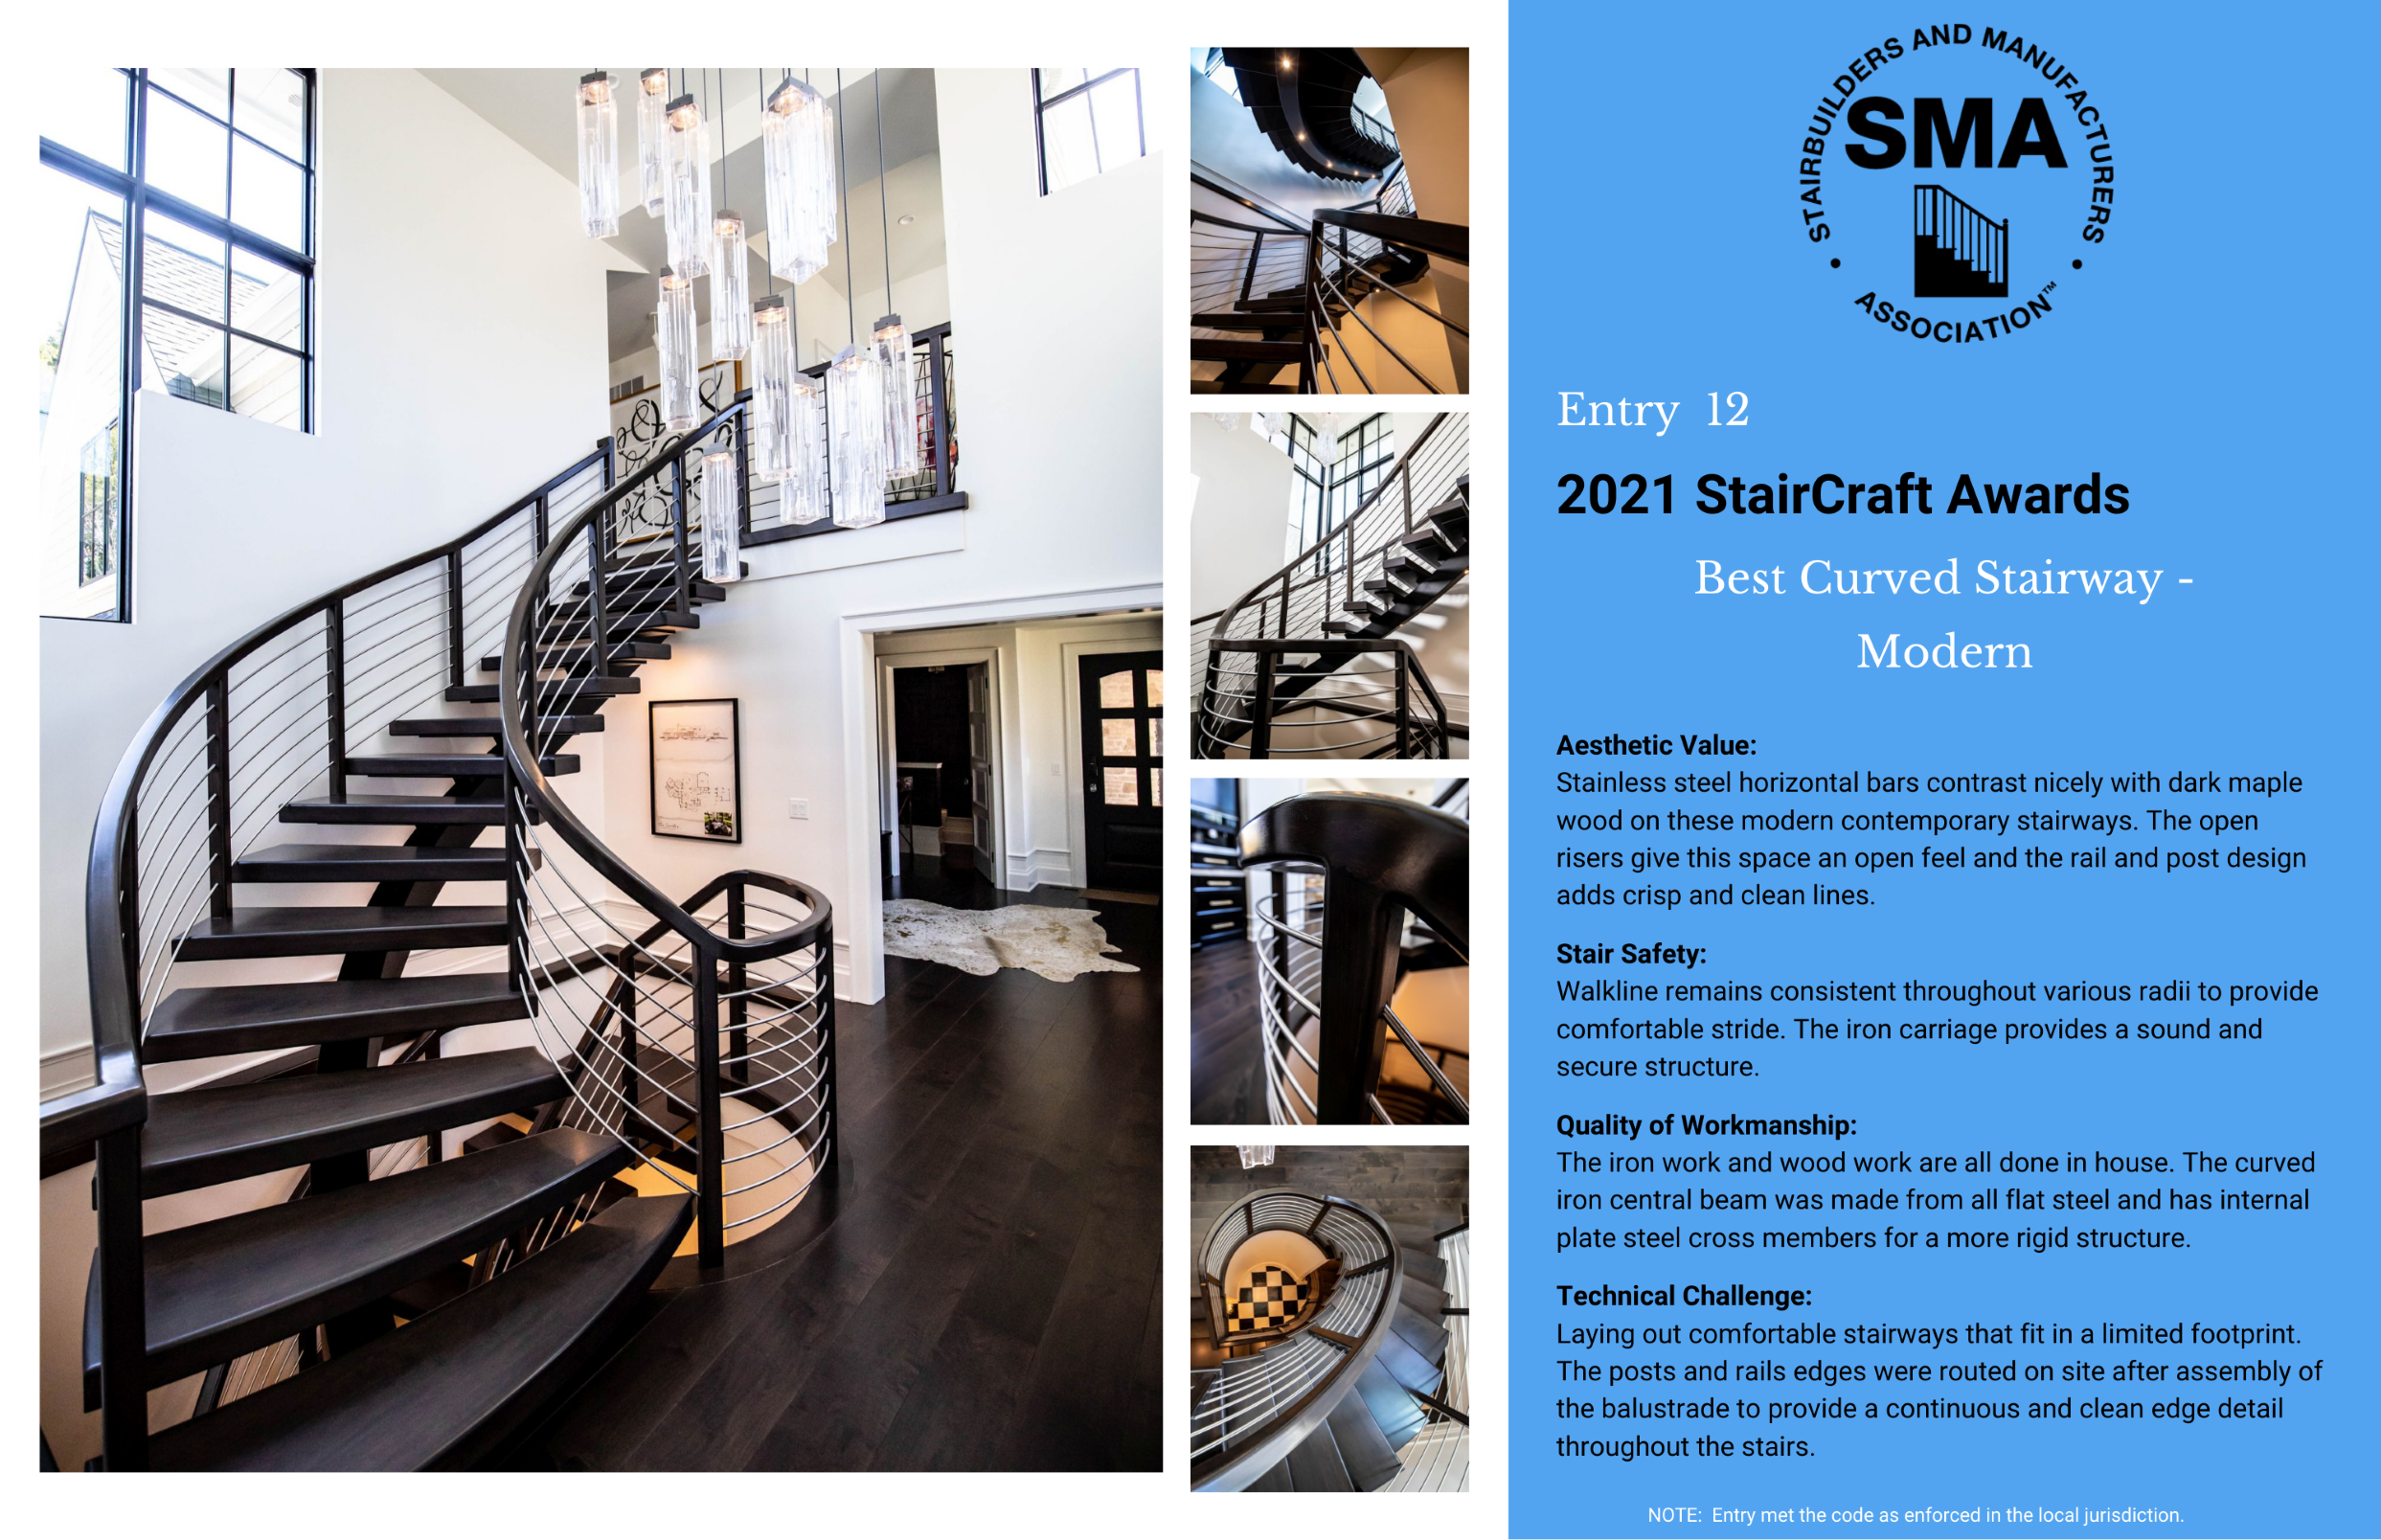 2021 StairCraft Awards Entry 12